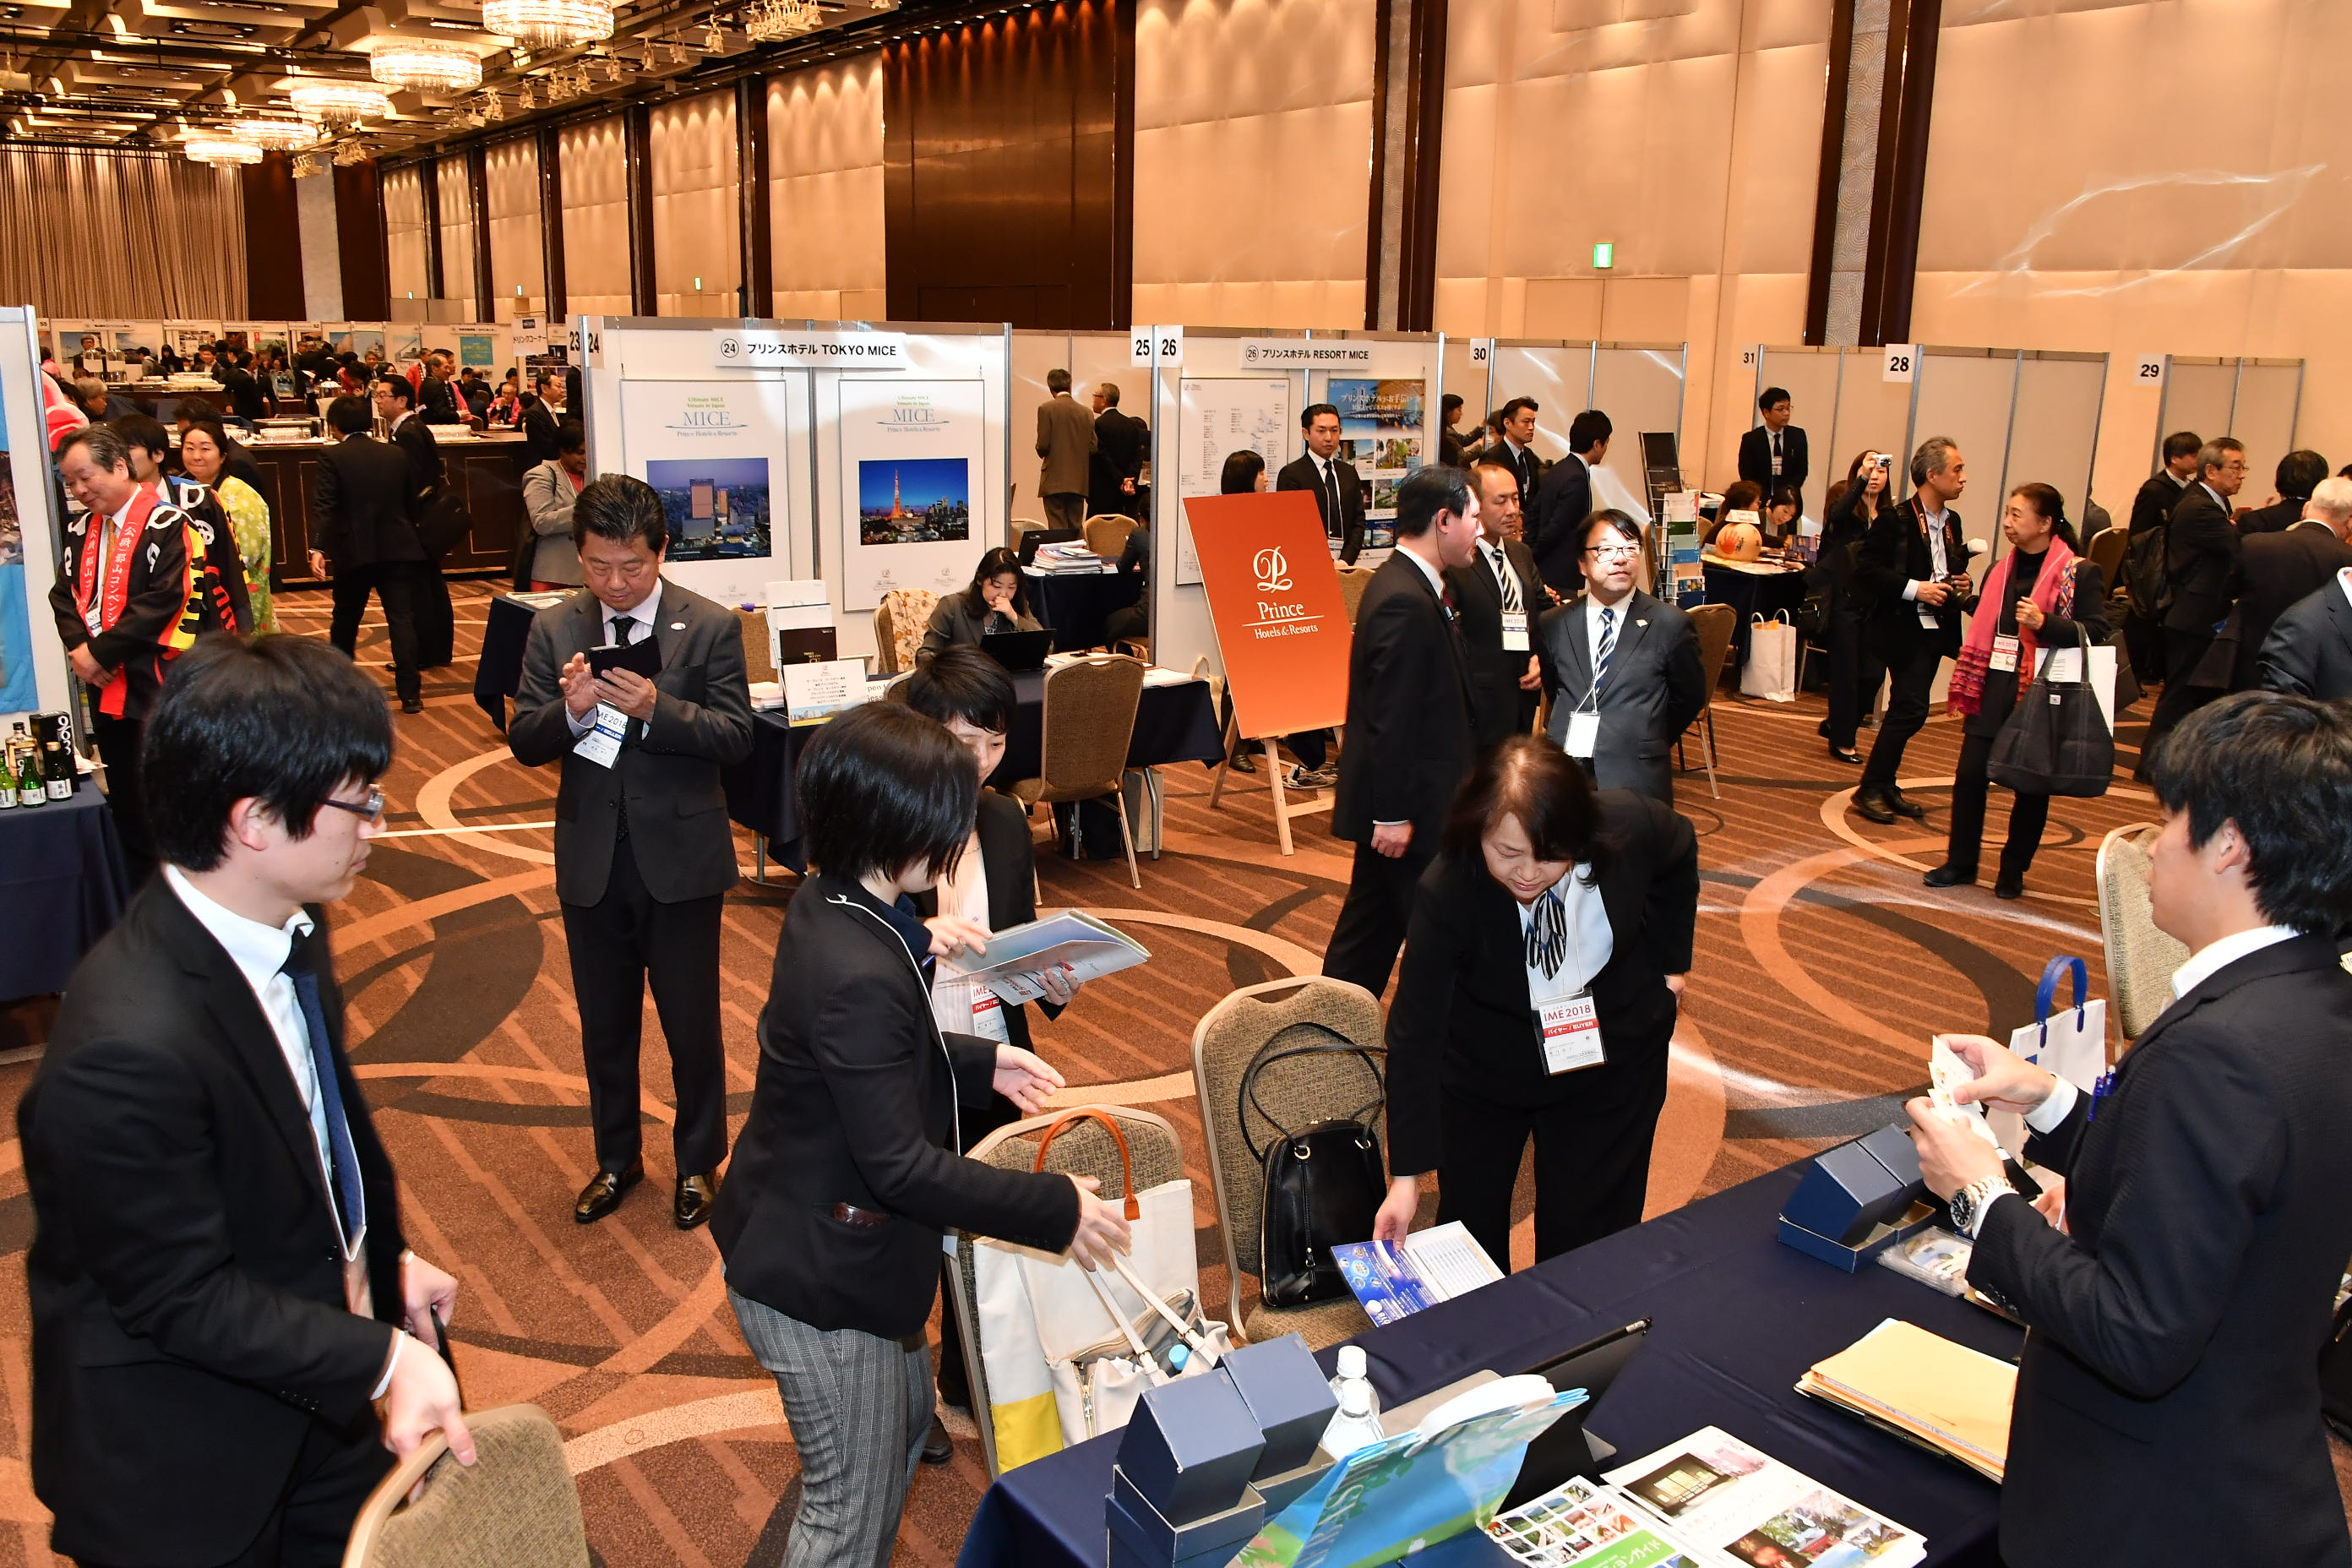 IME2018 succeeded to attract more than 400 buyers!